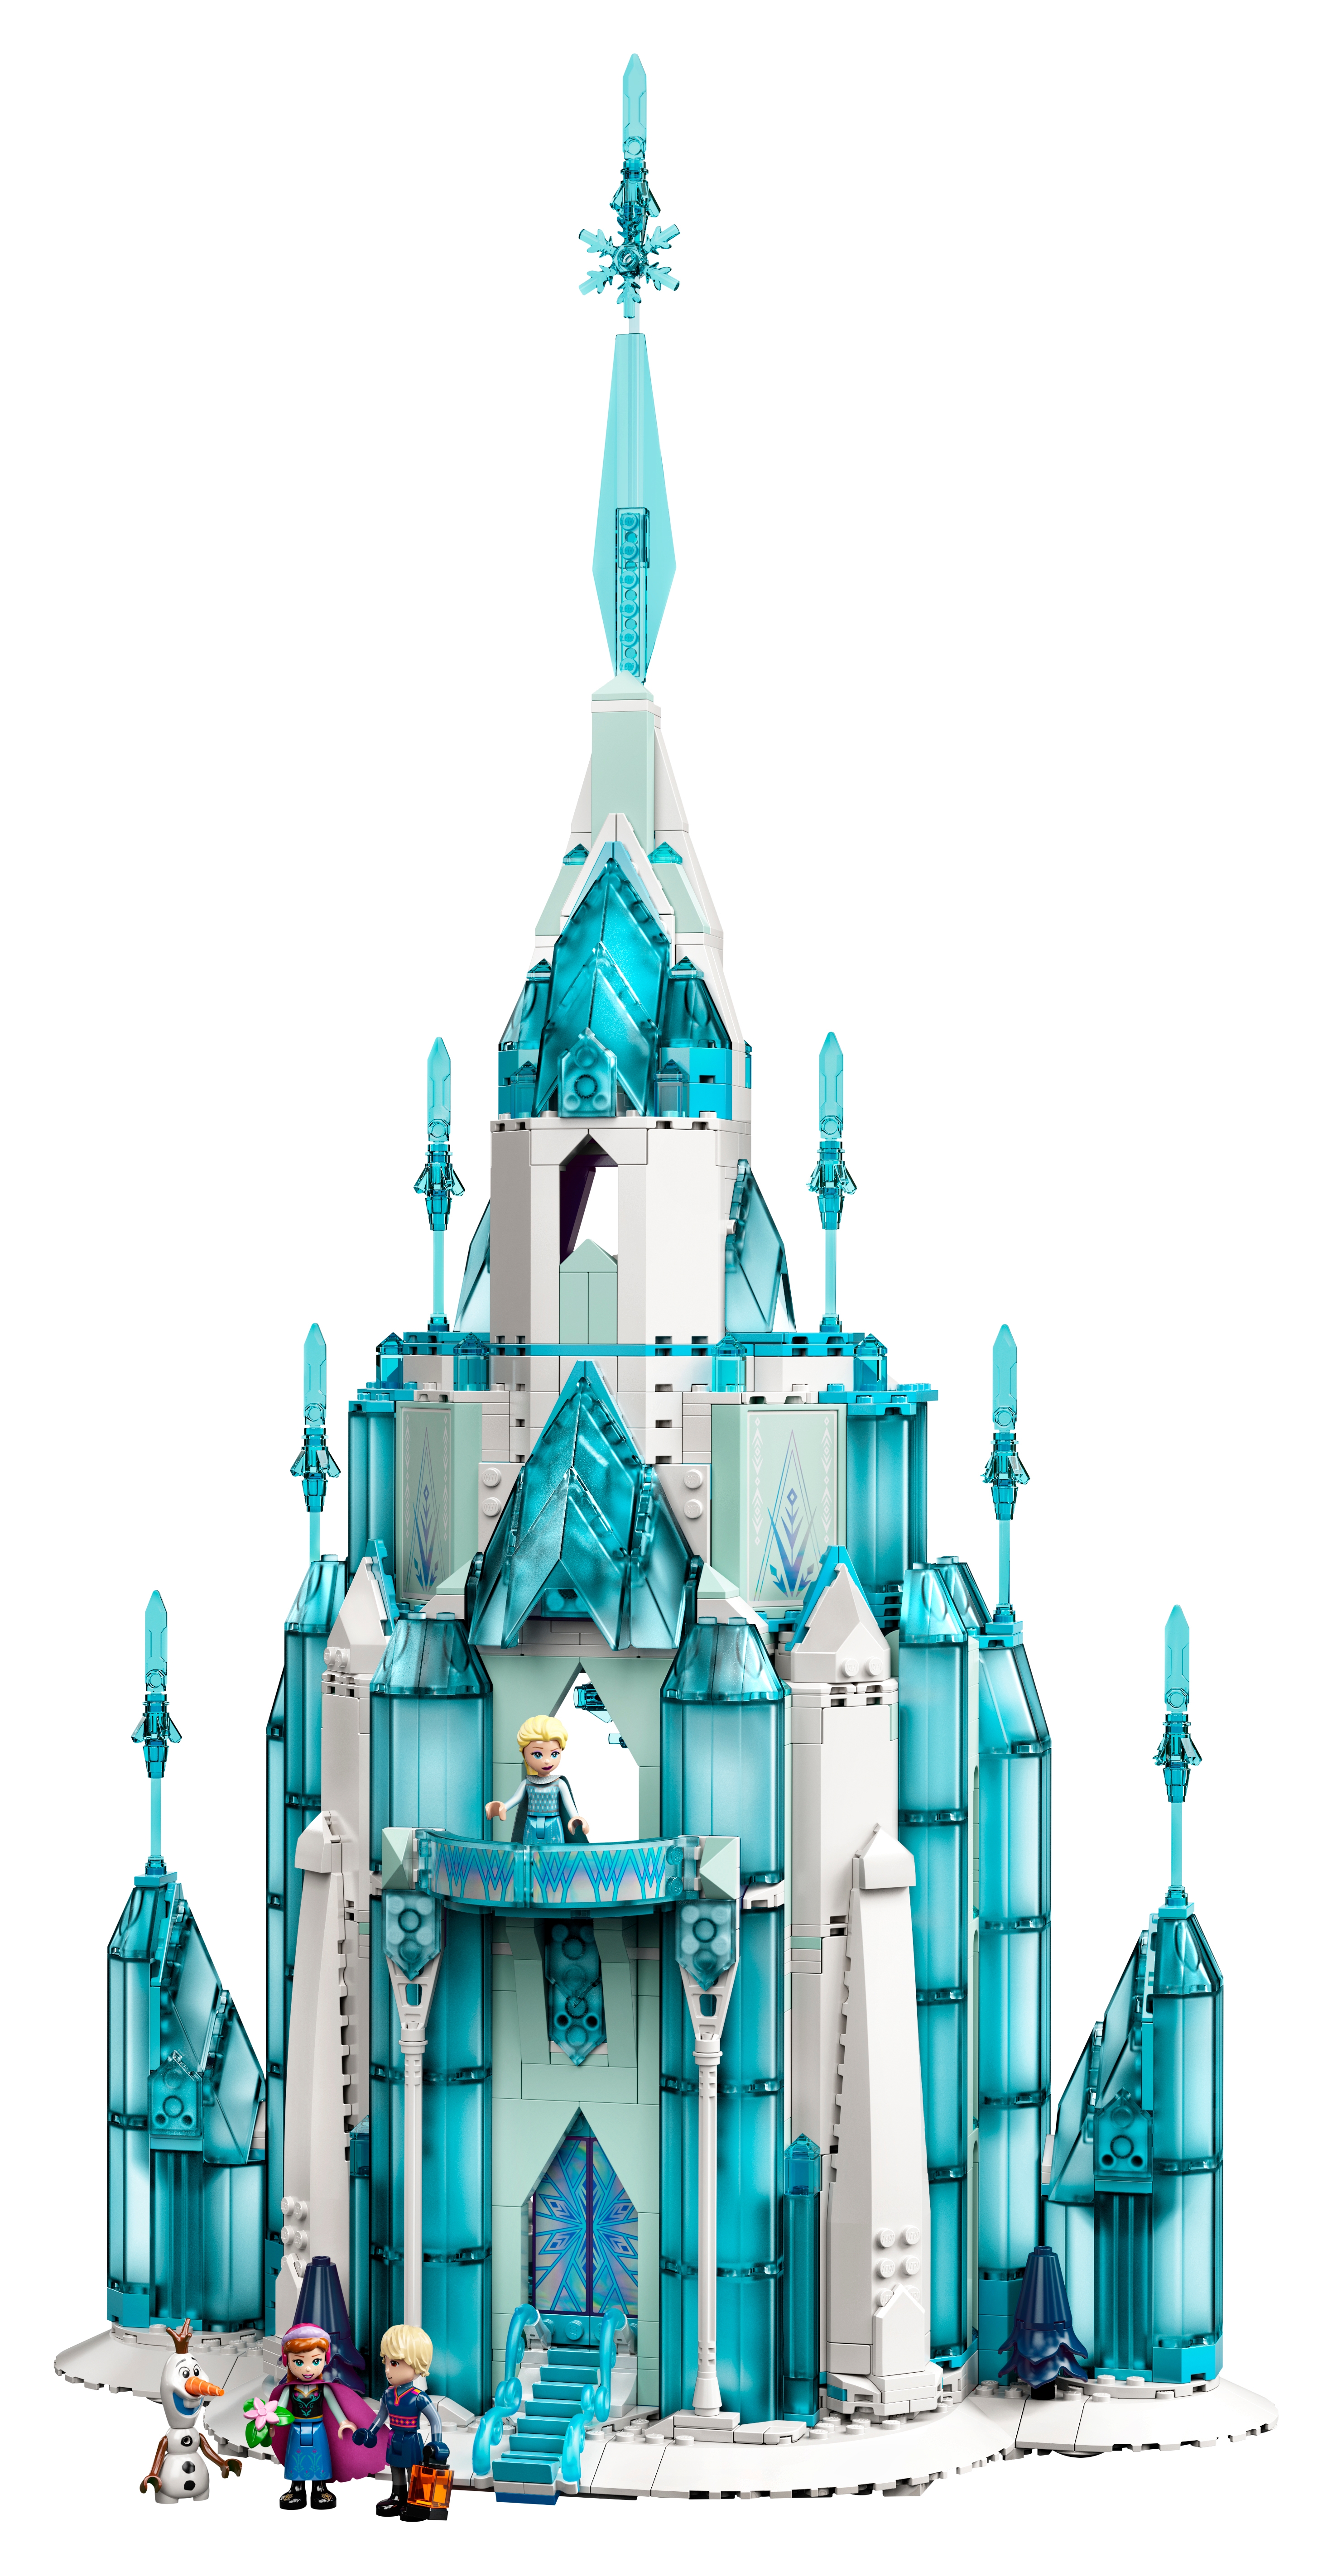 Lego New Disney Princess Frozen Minifigures from Set 43197 The Ice Castle